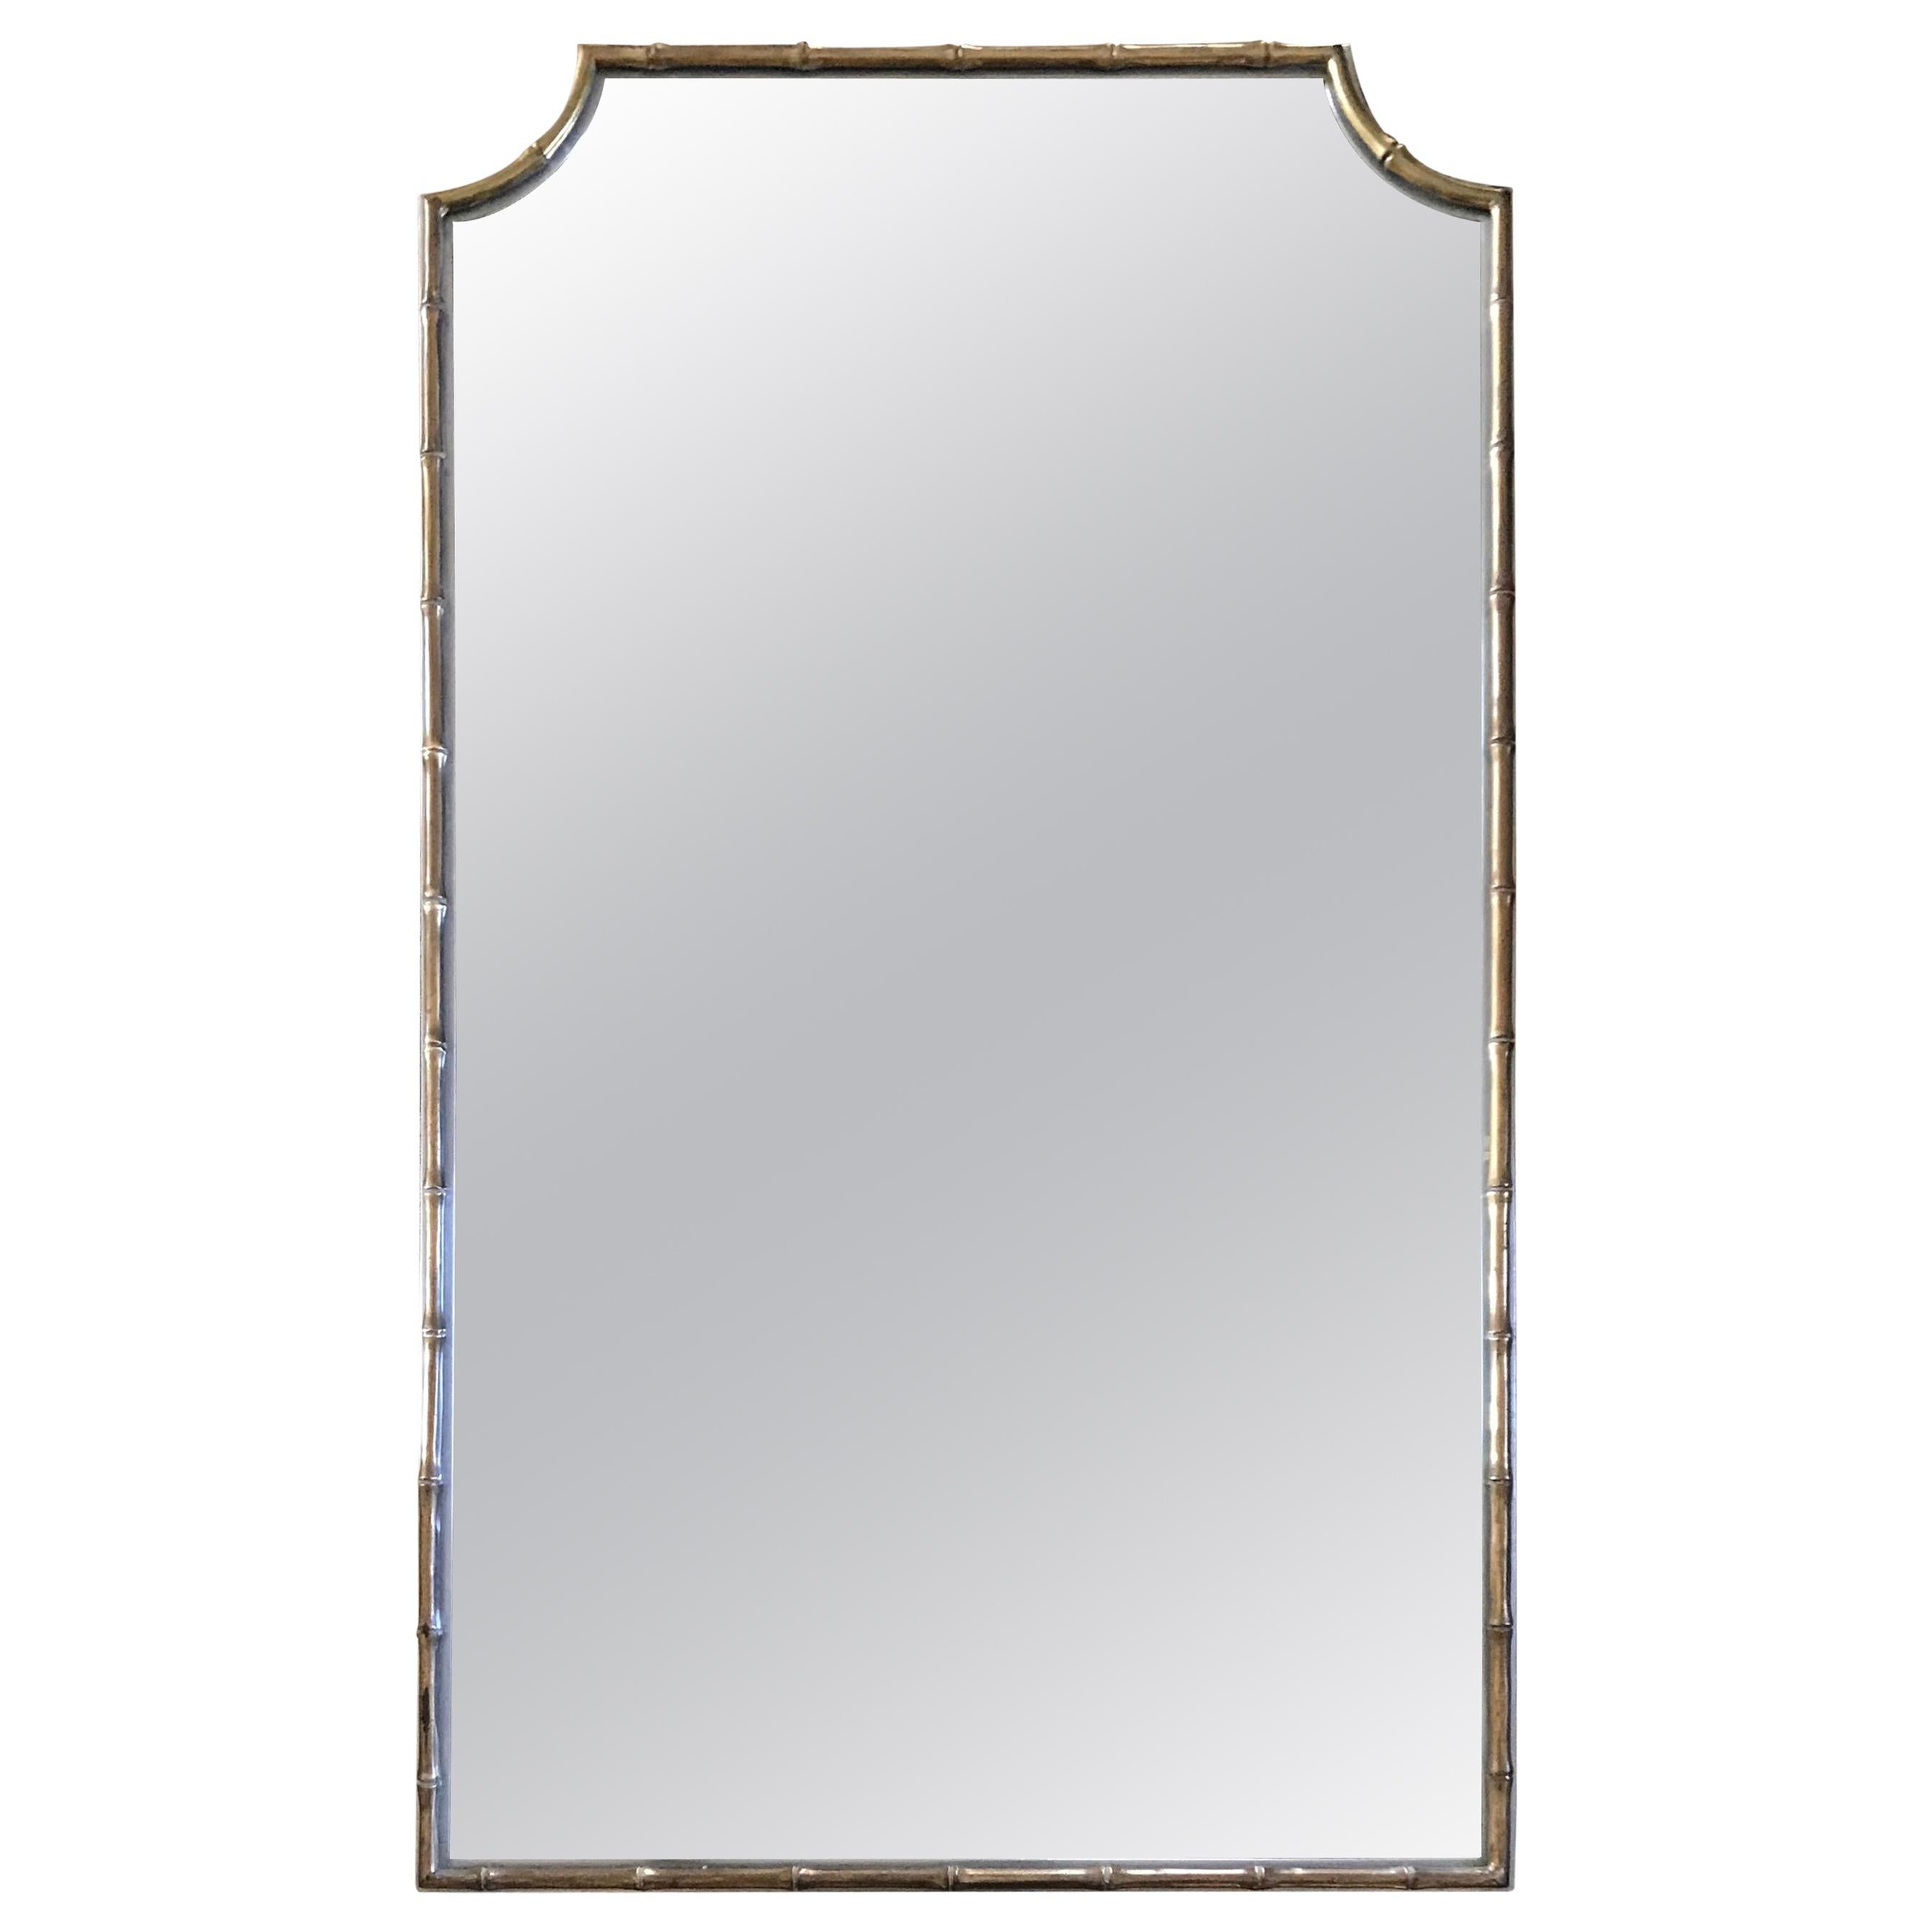 Hollywood Regency Steel and Brass Bamboo Mirror